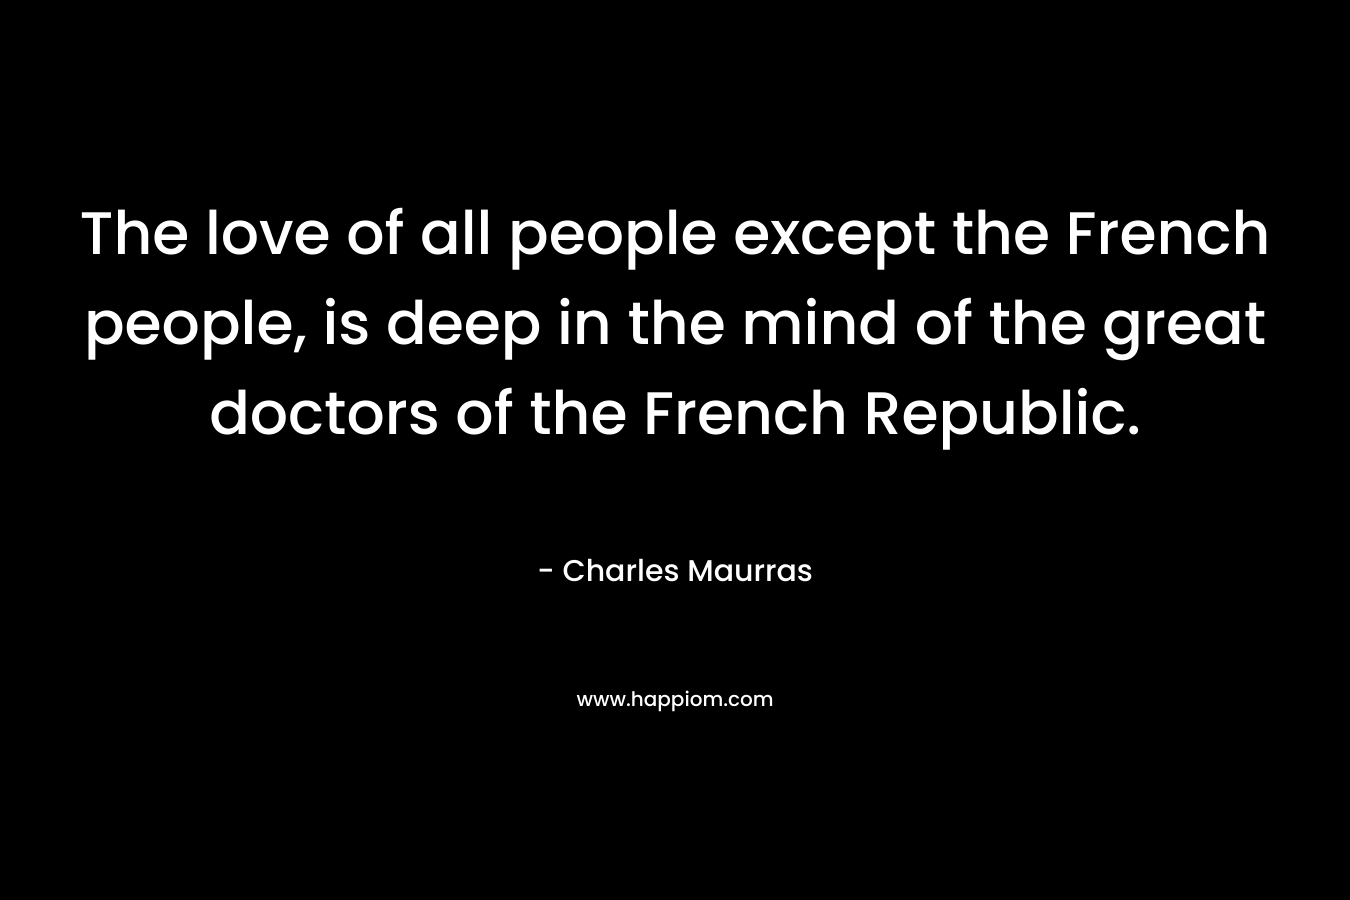 The love of all people except the French people, is deep in the mind of the great doctors of the French Republic.